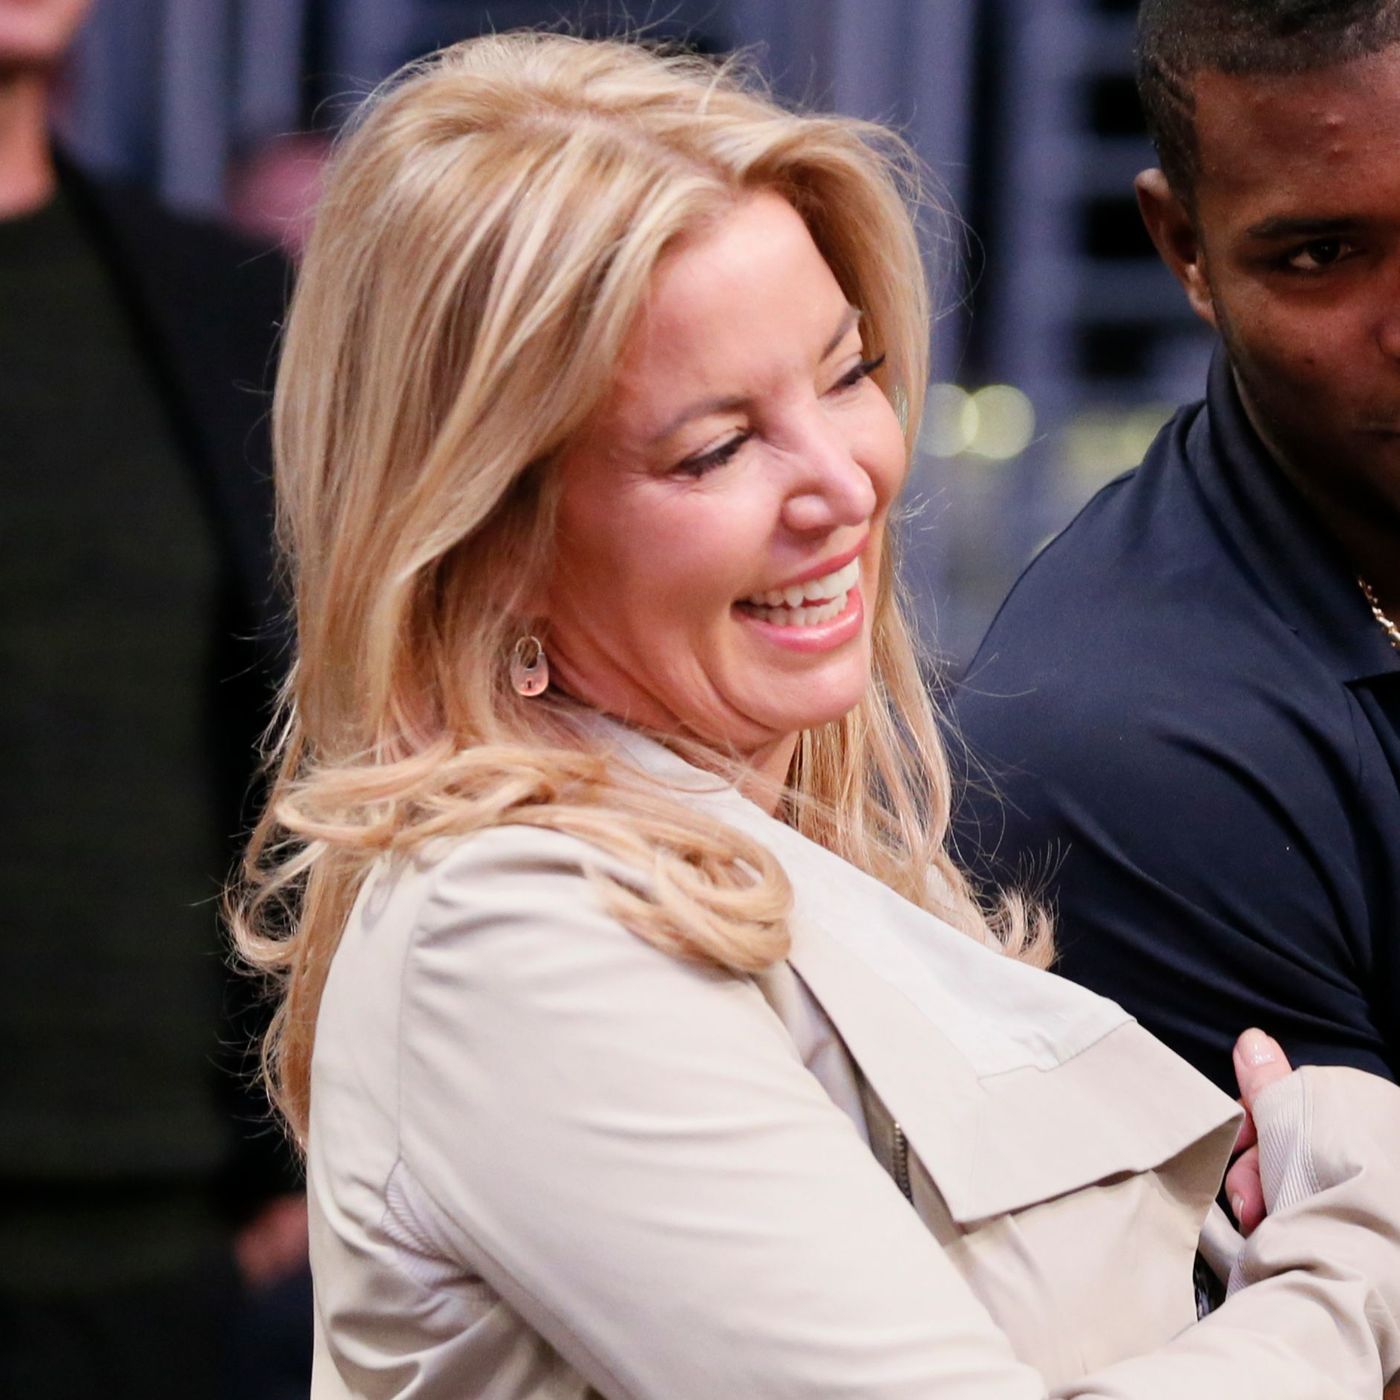 Jeanie Buss on state of the Lakers, Phil Jackson & jersey ads